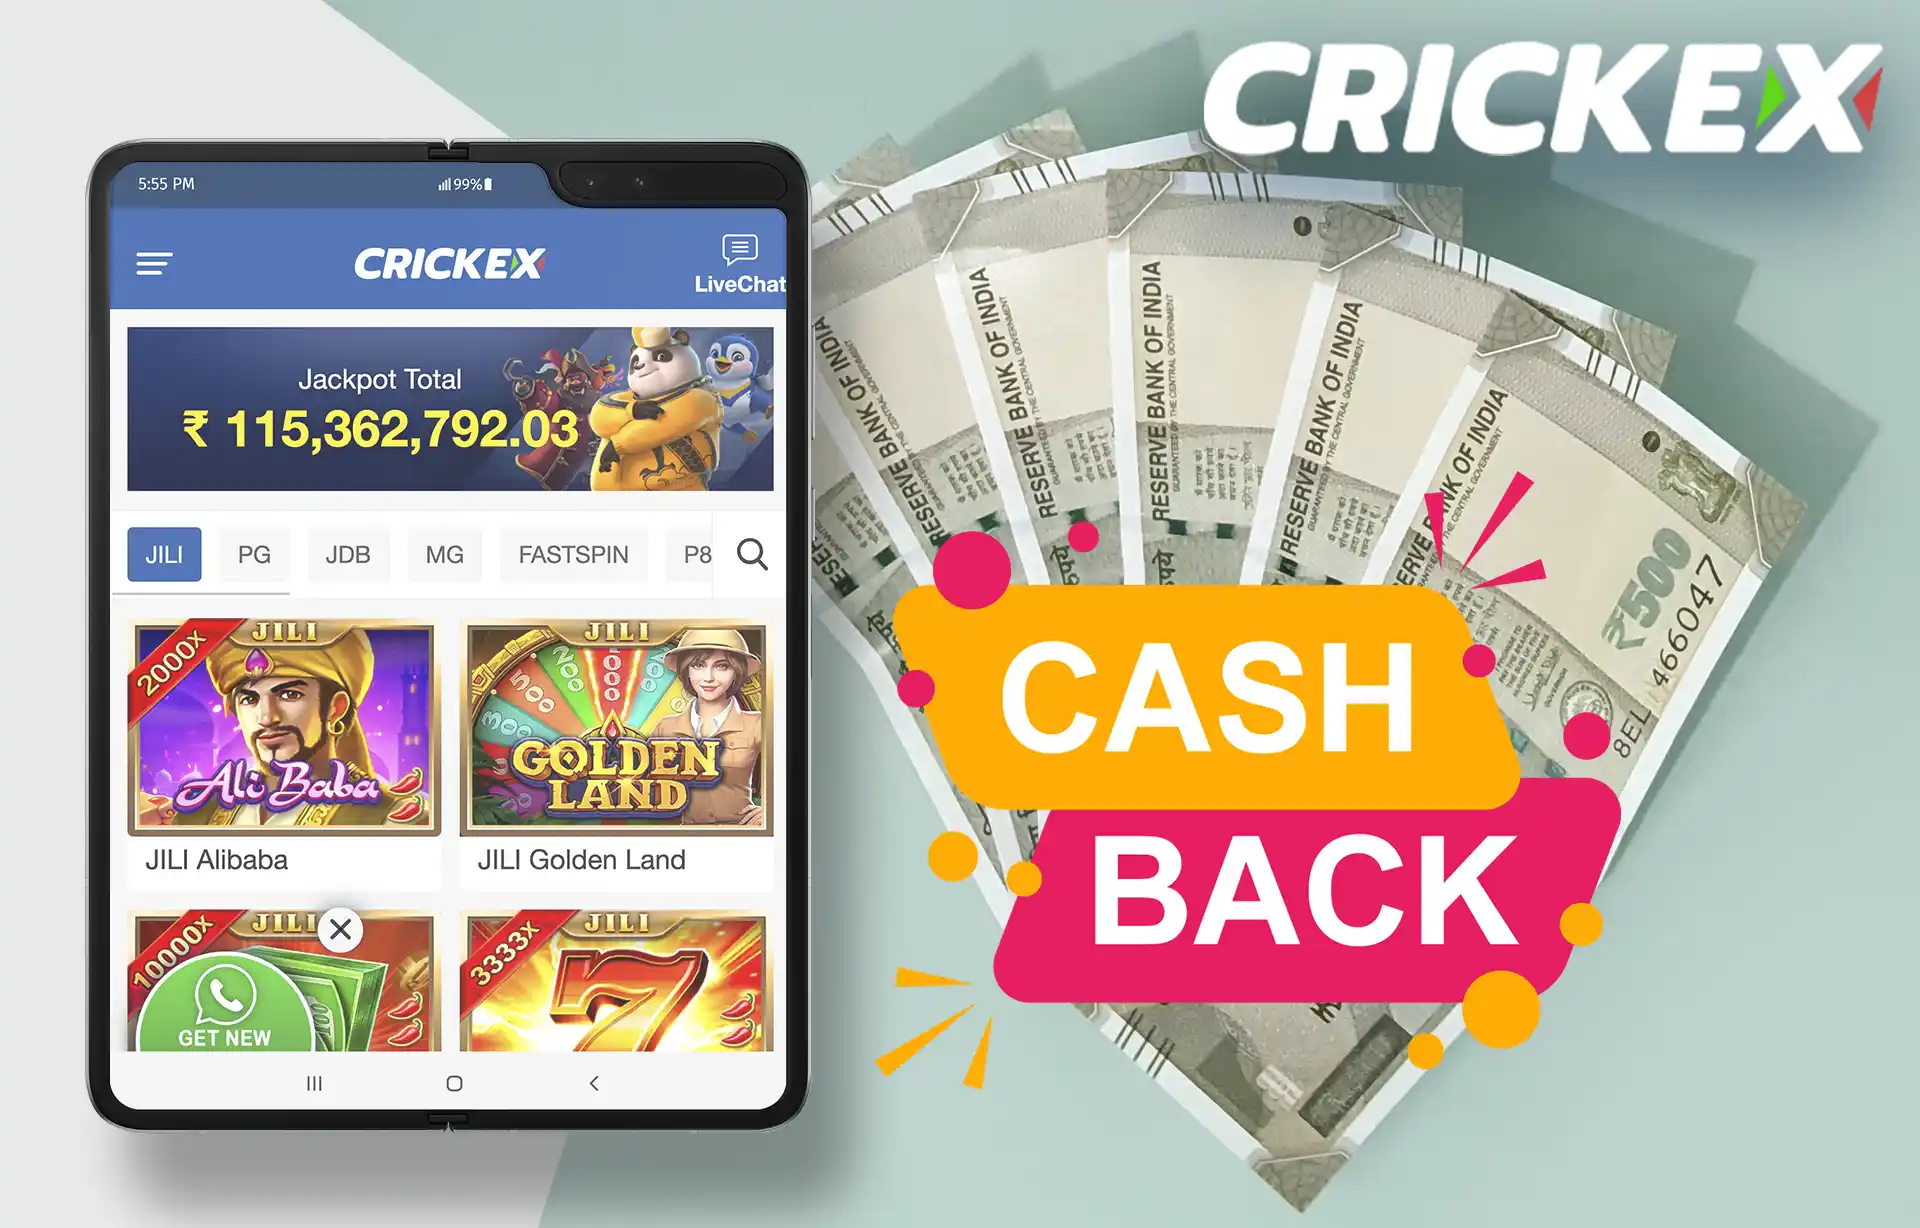 Users from Bangladesh can get 5% cashback on their account as a loyalty to Crickex.